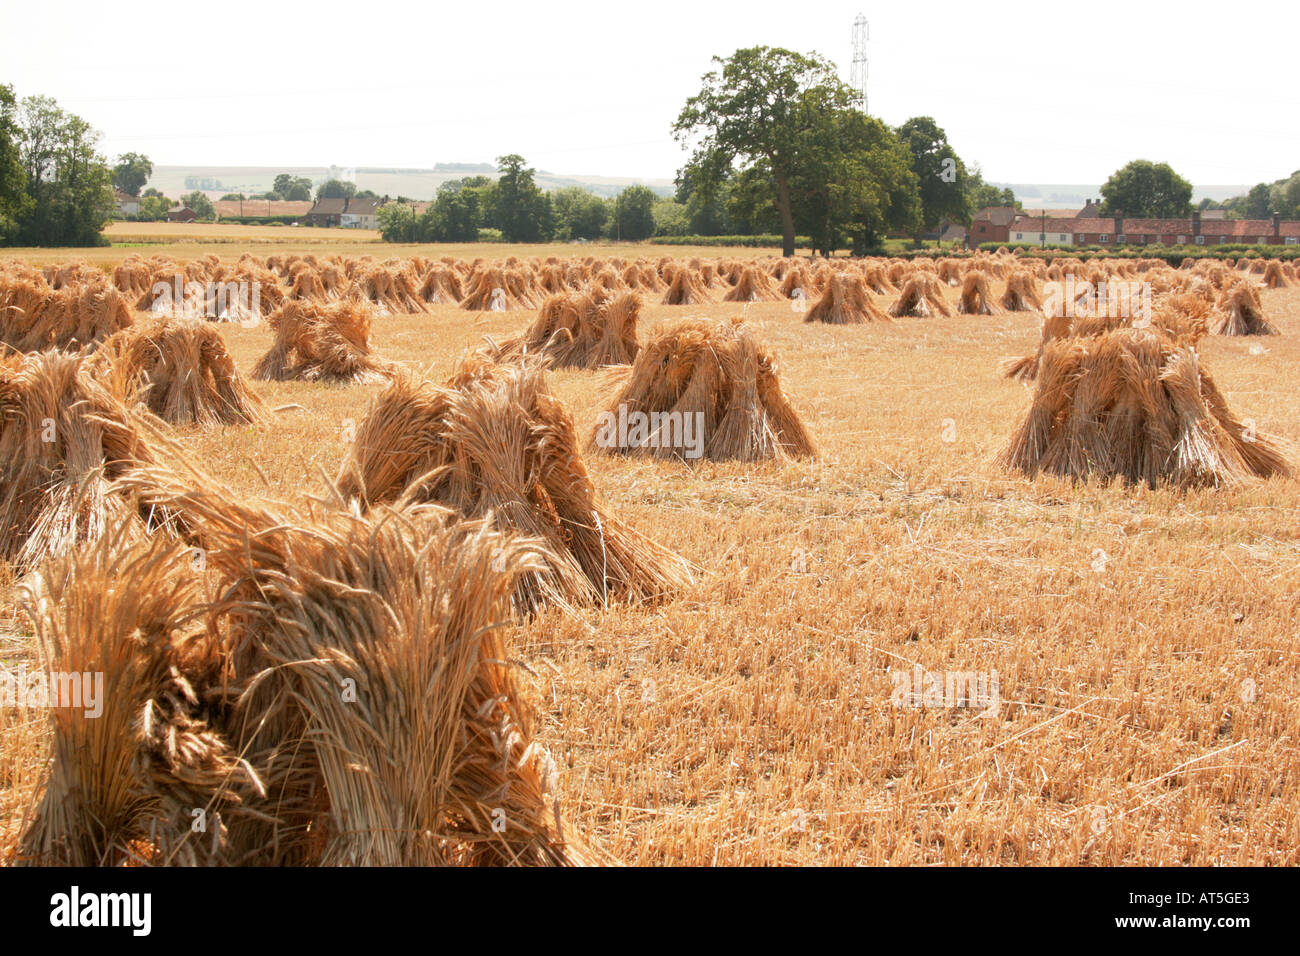 Wiltshire UK England Harvest old fashioned Stocks stooks stouks or shocks drying in field Stock Photo